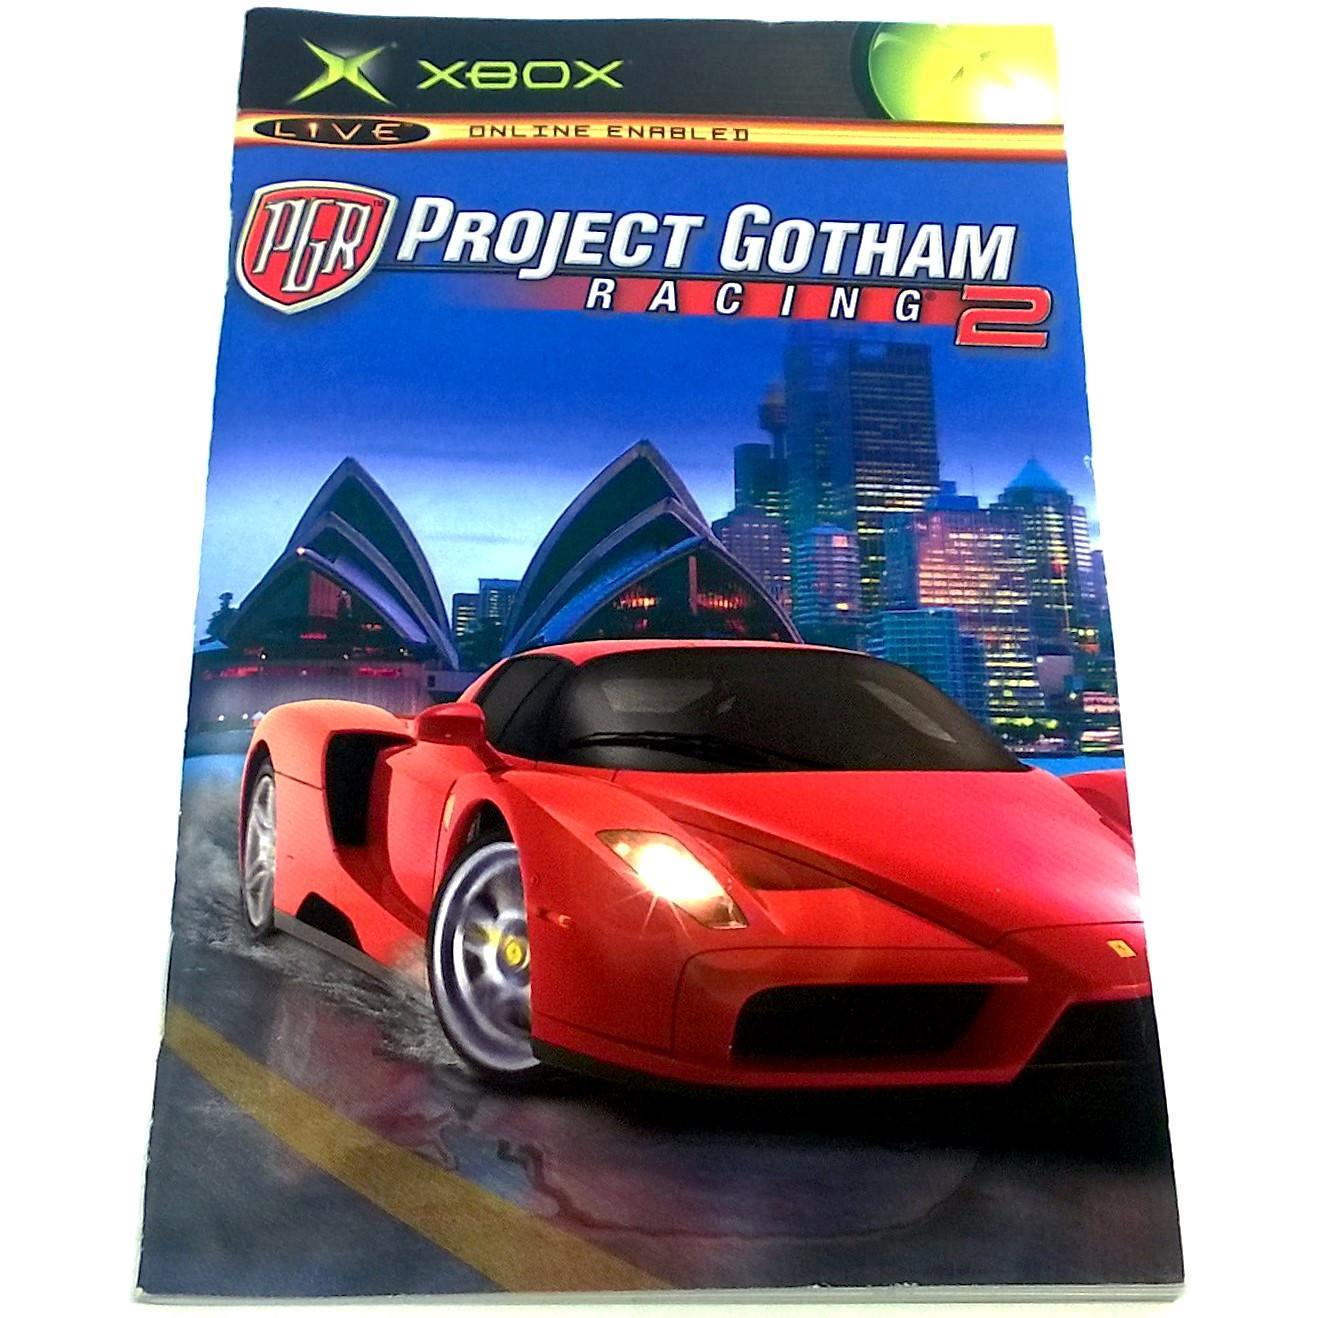 Project Gotham Racing 2 for Xbox - Front of manual